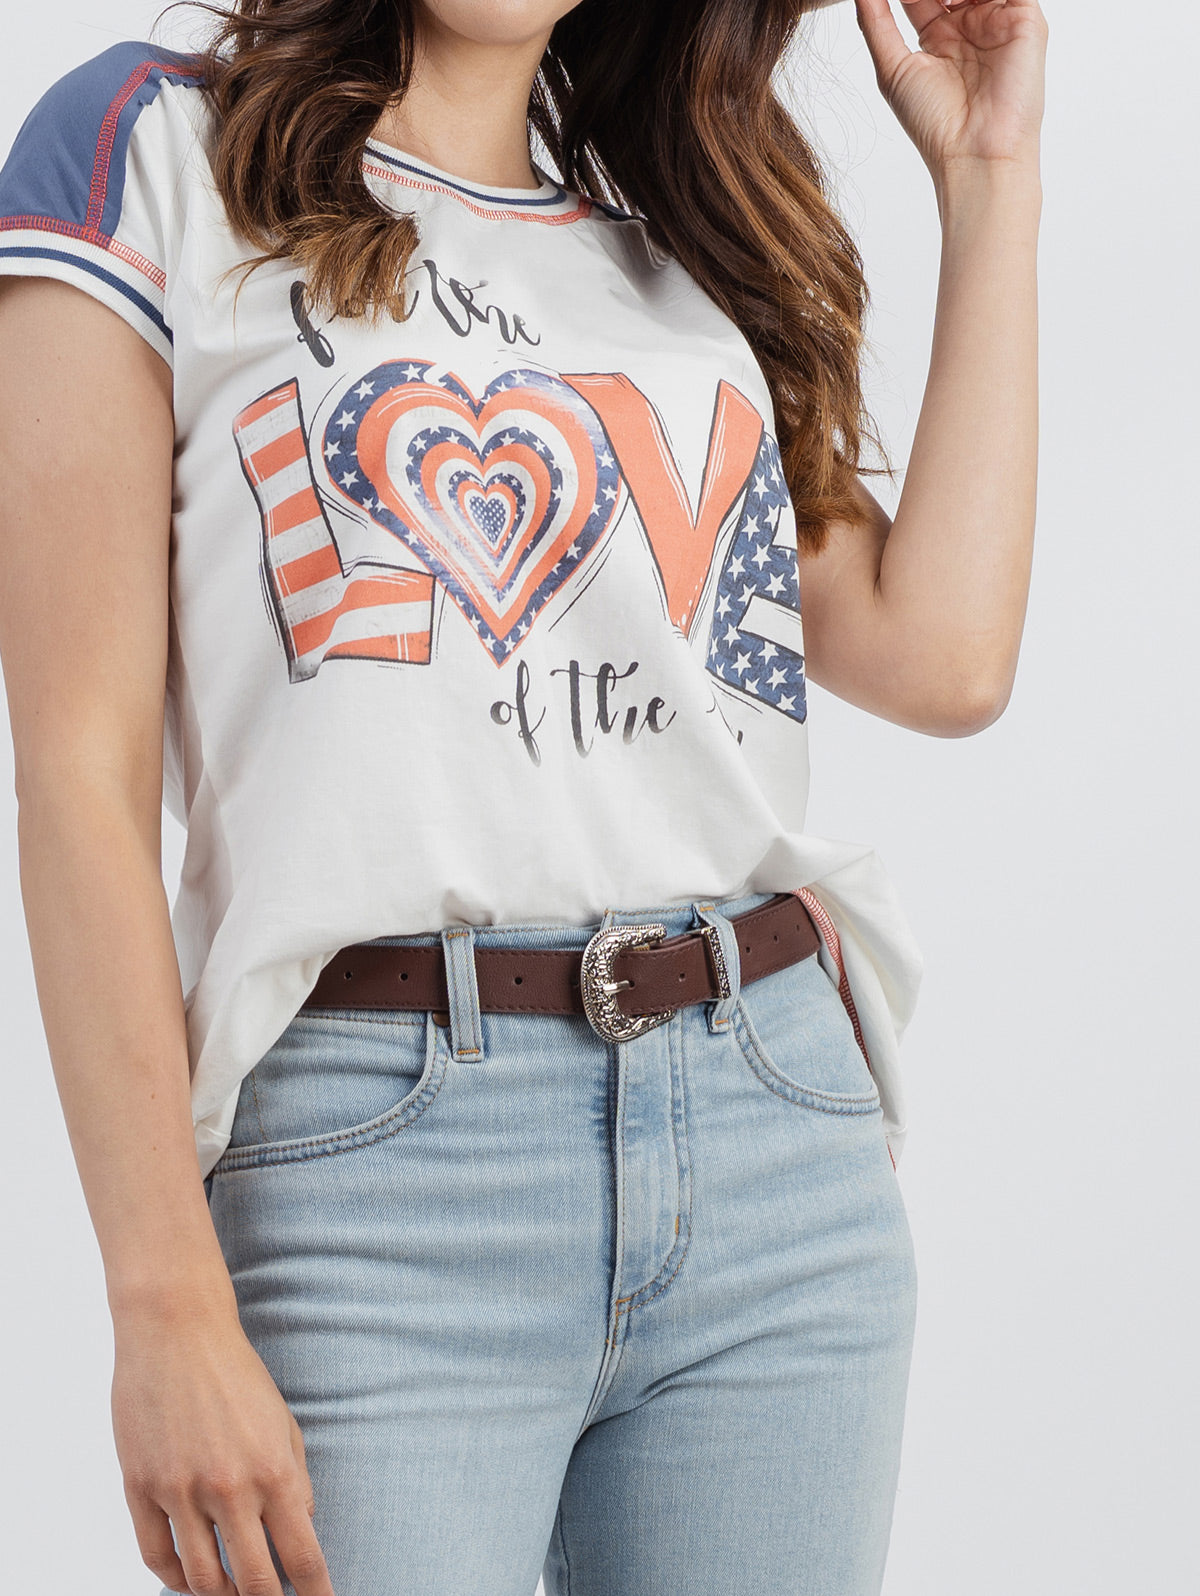 Women's Mineral Wash Contrast Stitched “Love” Graphic Patriot Short Sleeve Tee - Cowgirl Wear